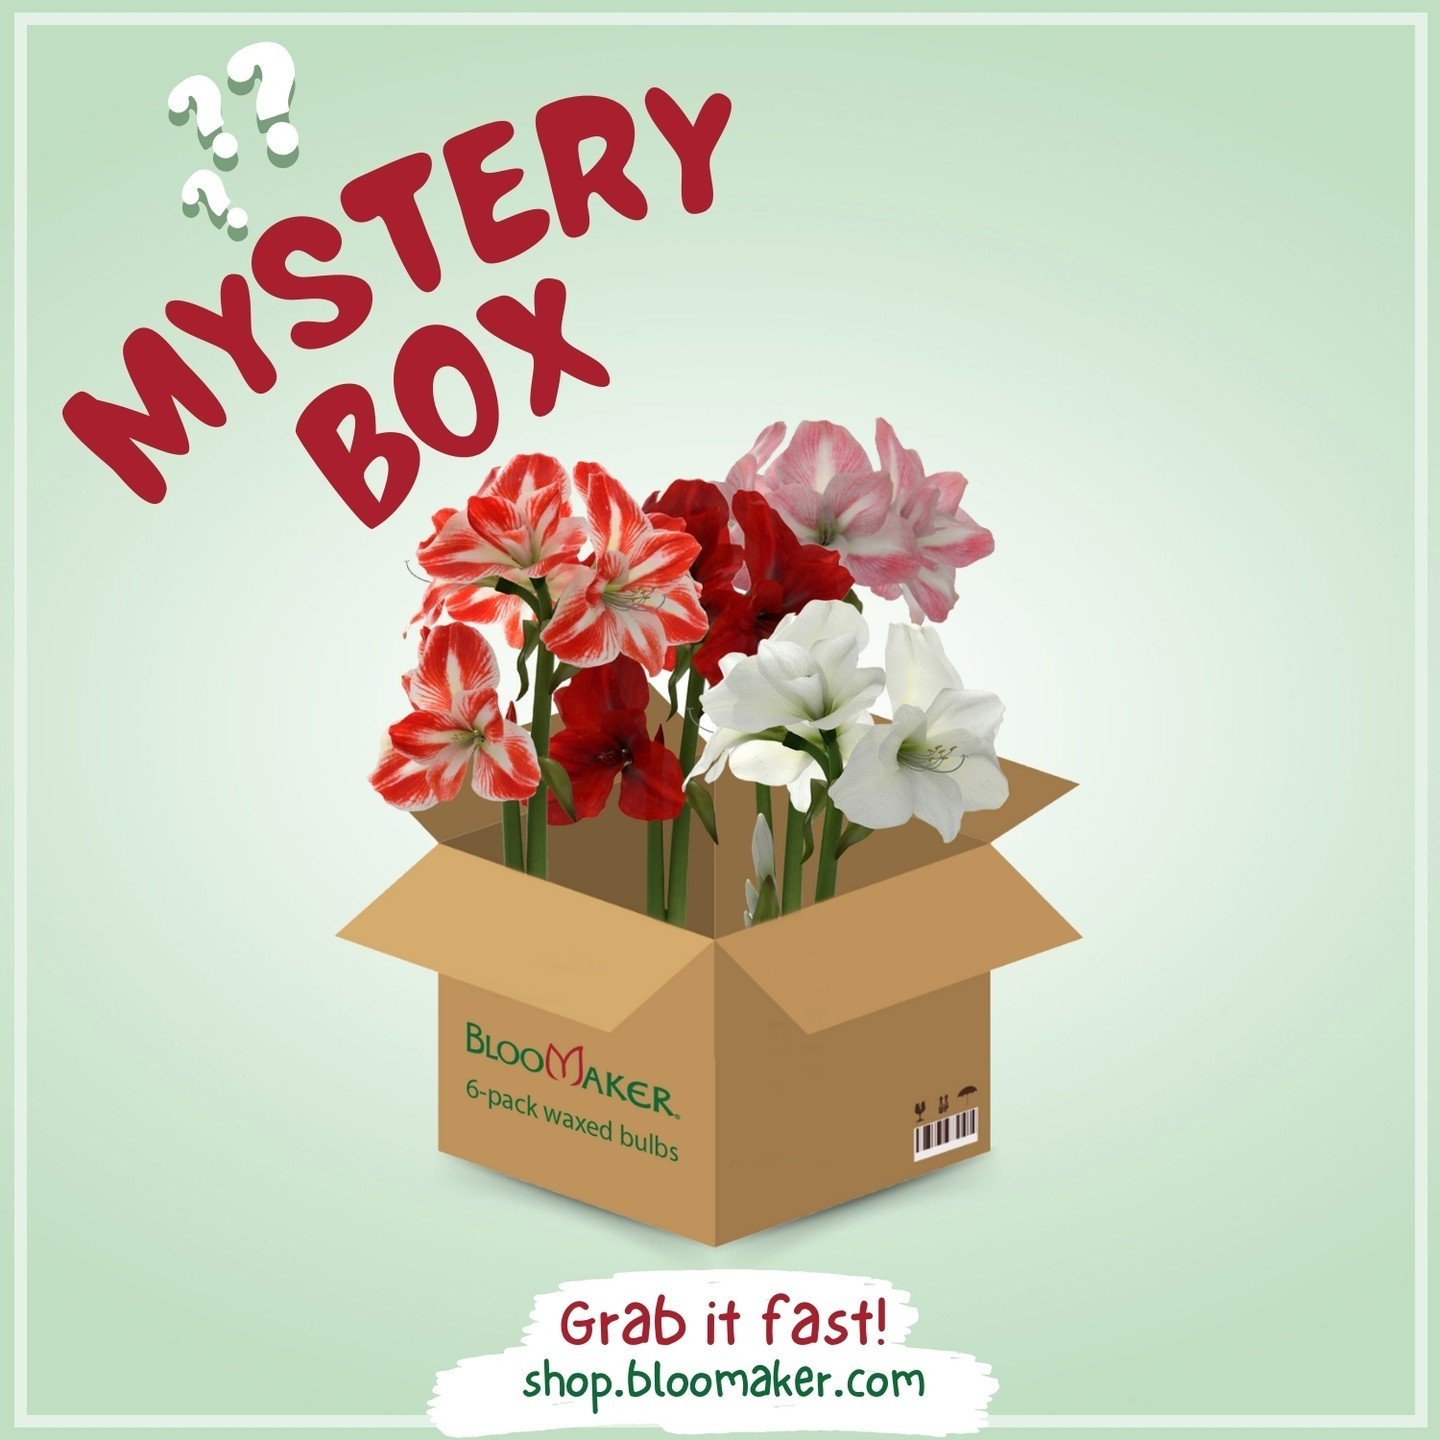 Unveiling an Exciting Surprise! 🎁
 
Get ready for a peak your floral curiosity with our New Mystery Amaryllis! 🔎 Embrace the unknown as we share our premium spring time collection with you, sure to brighten up any room! 🌟
 
🎉 What's Inside? It's 